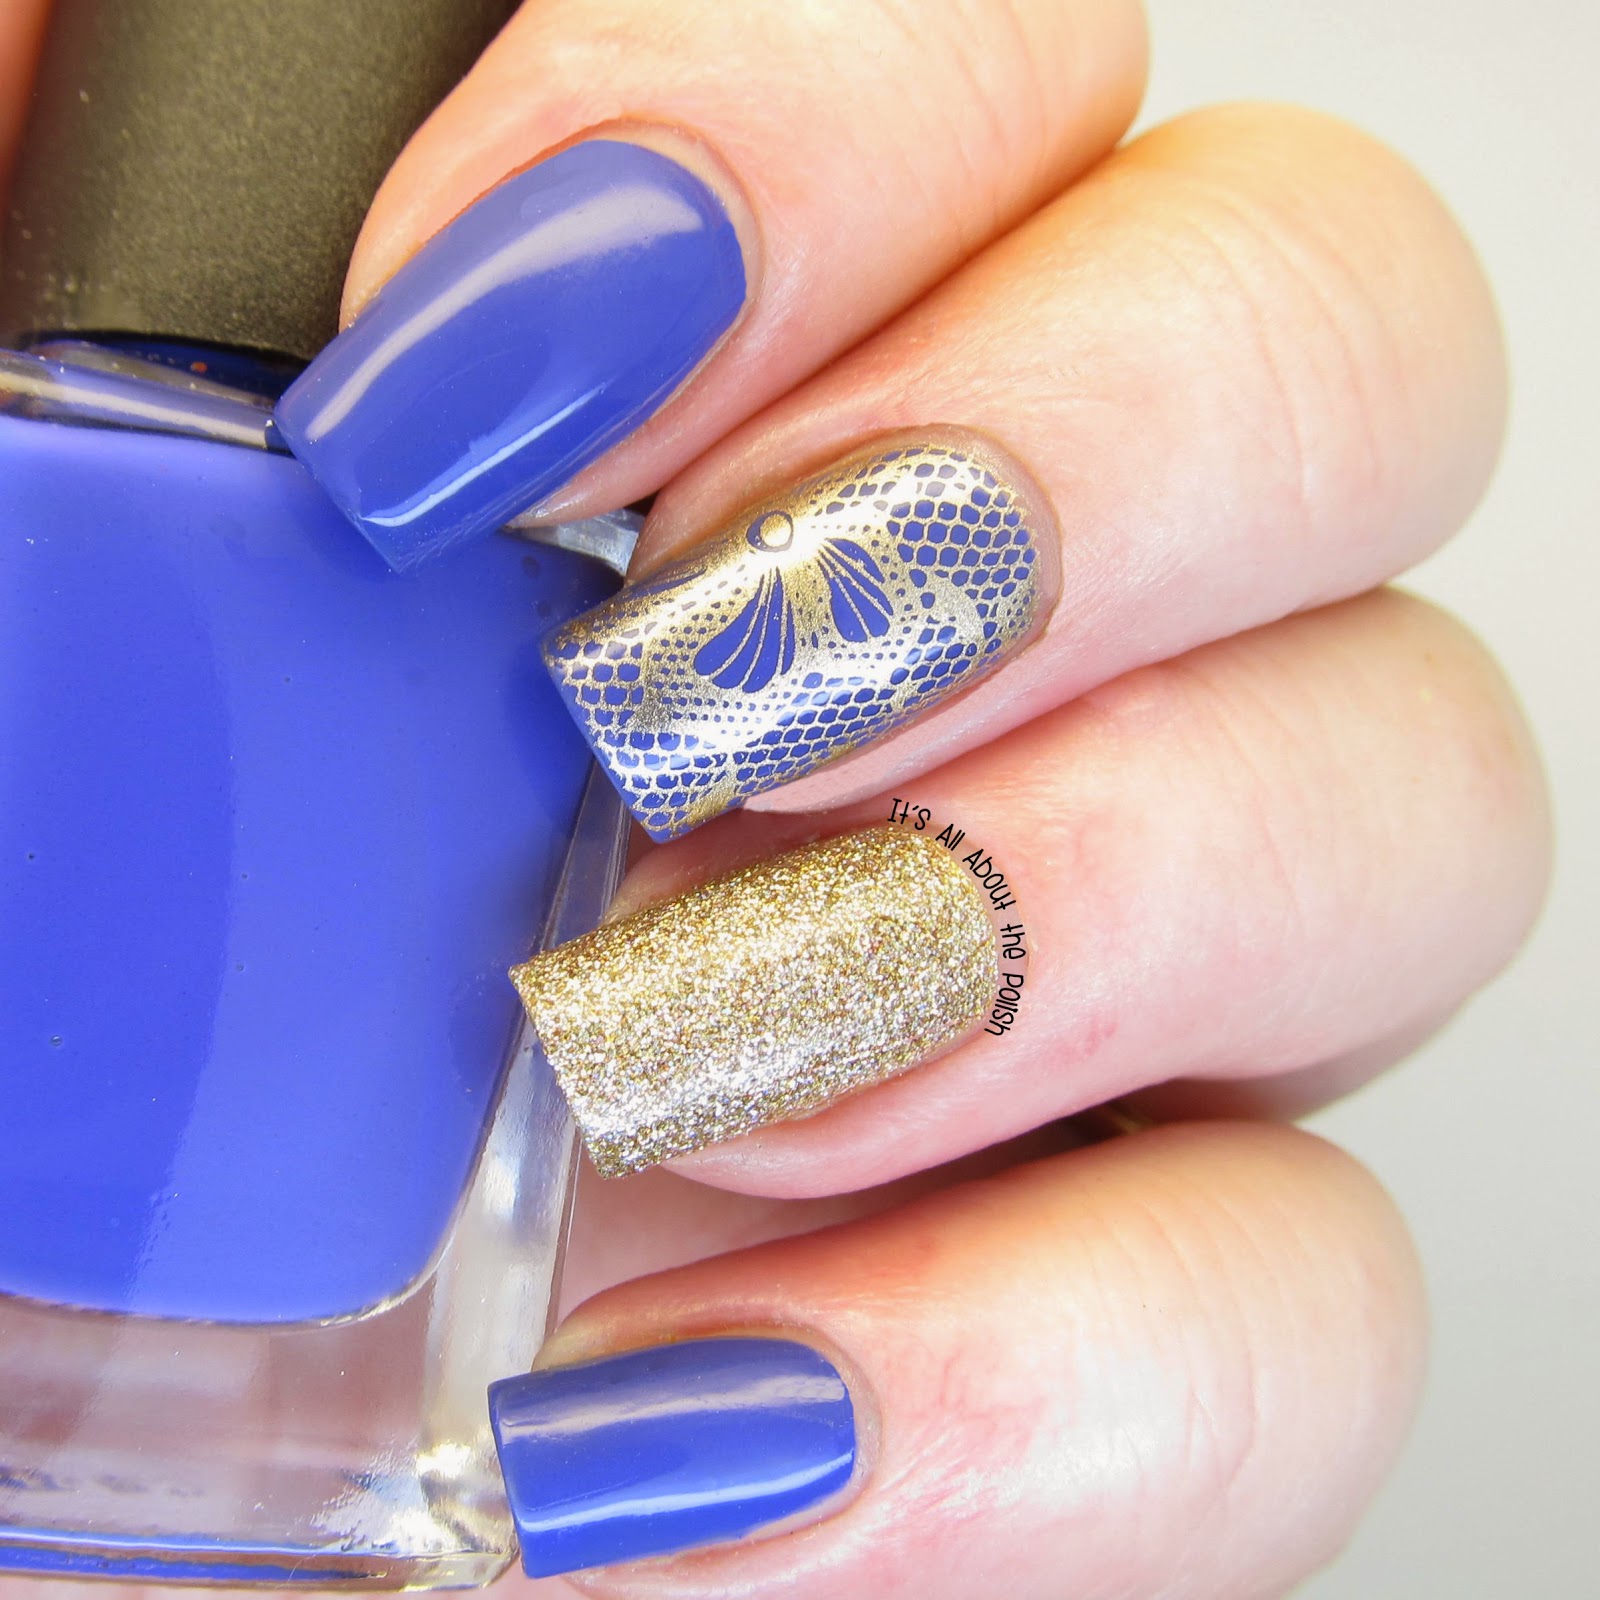 It's all about the polish: Periwinkle blue and lace nail design